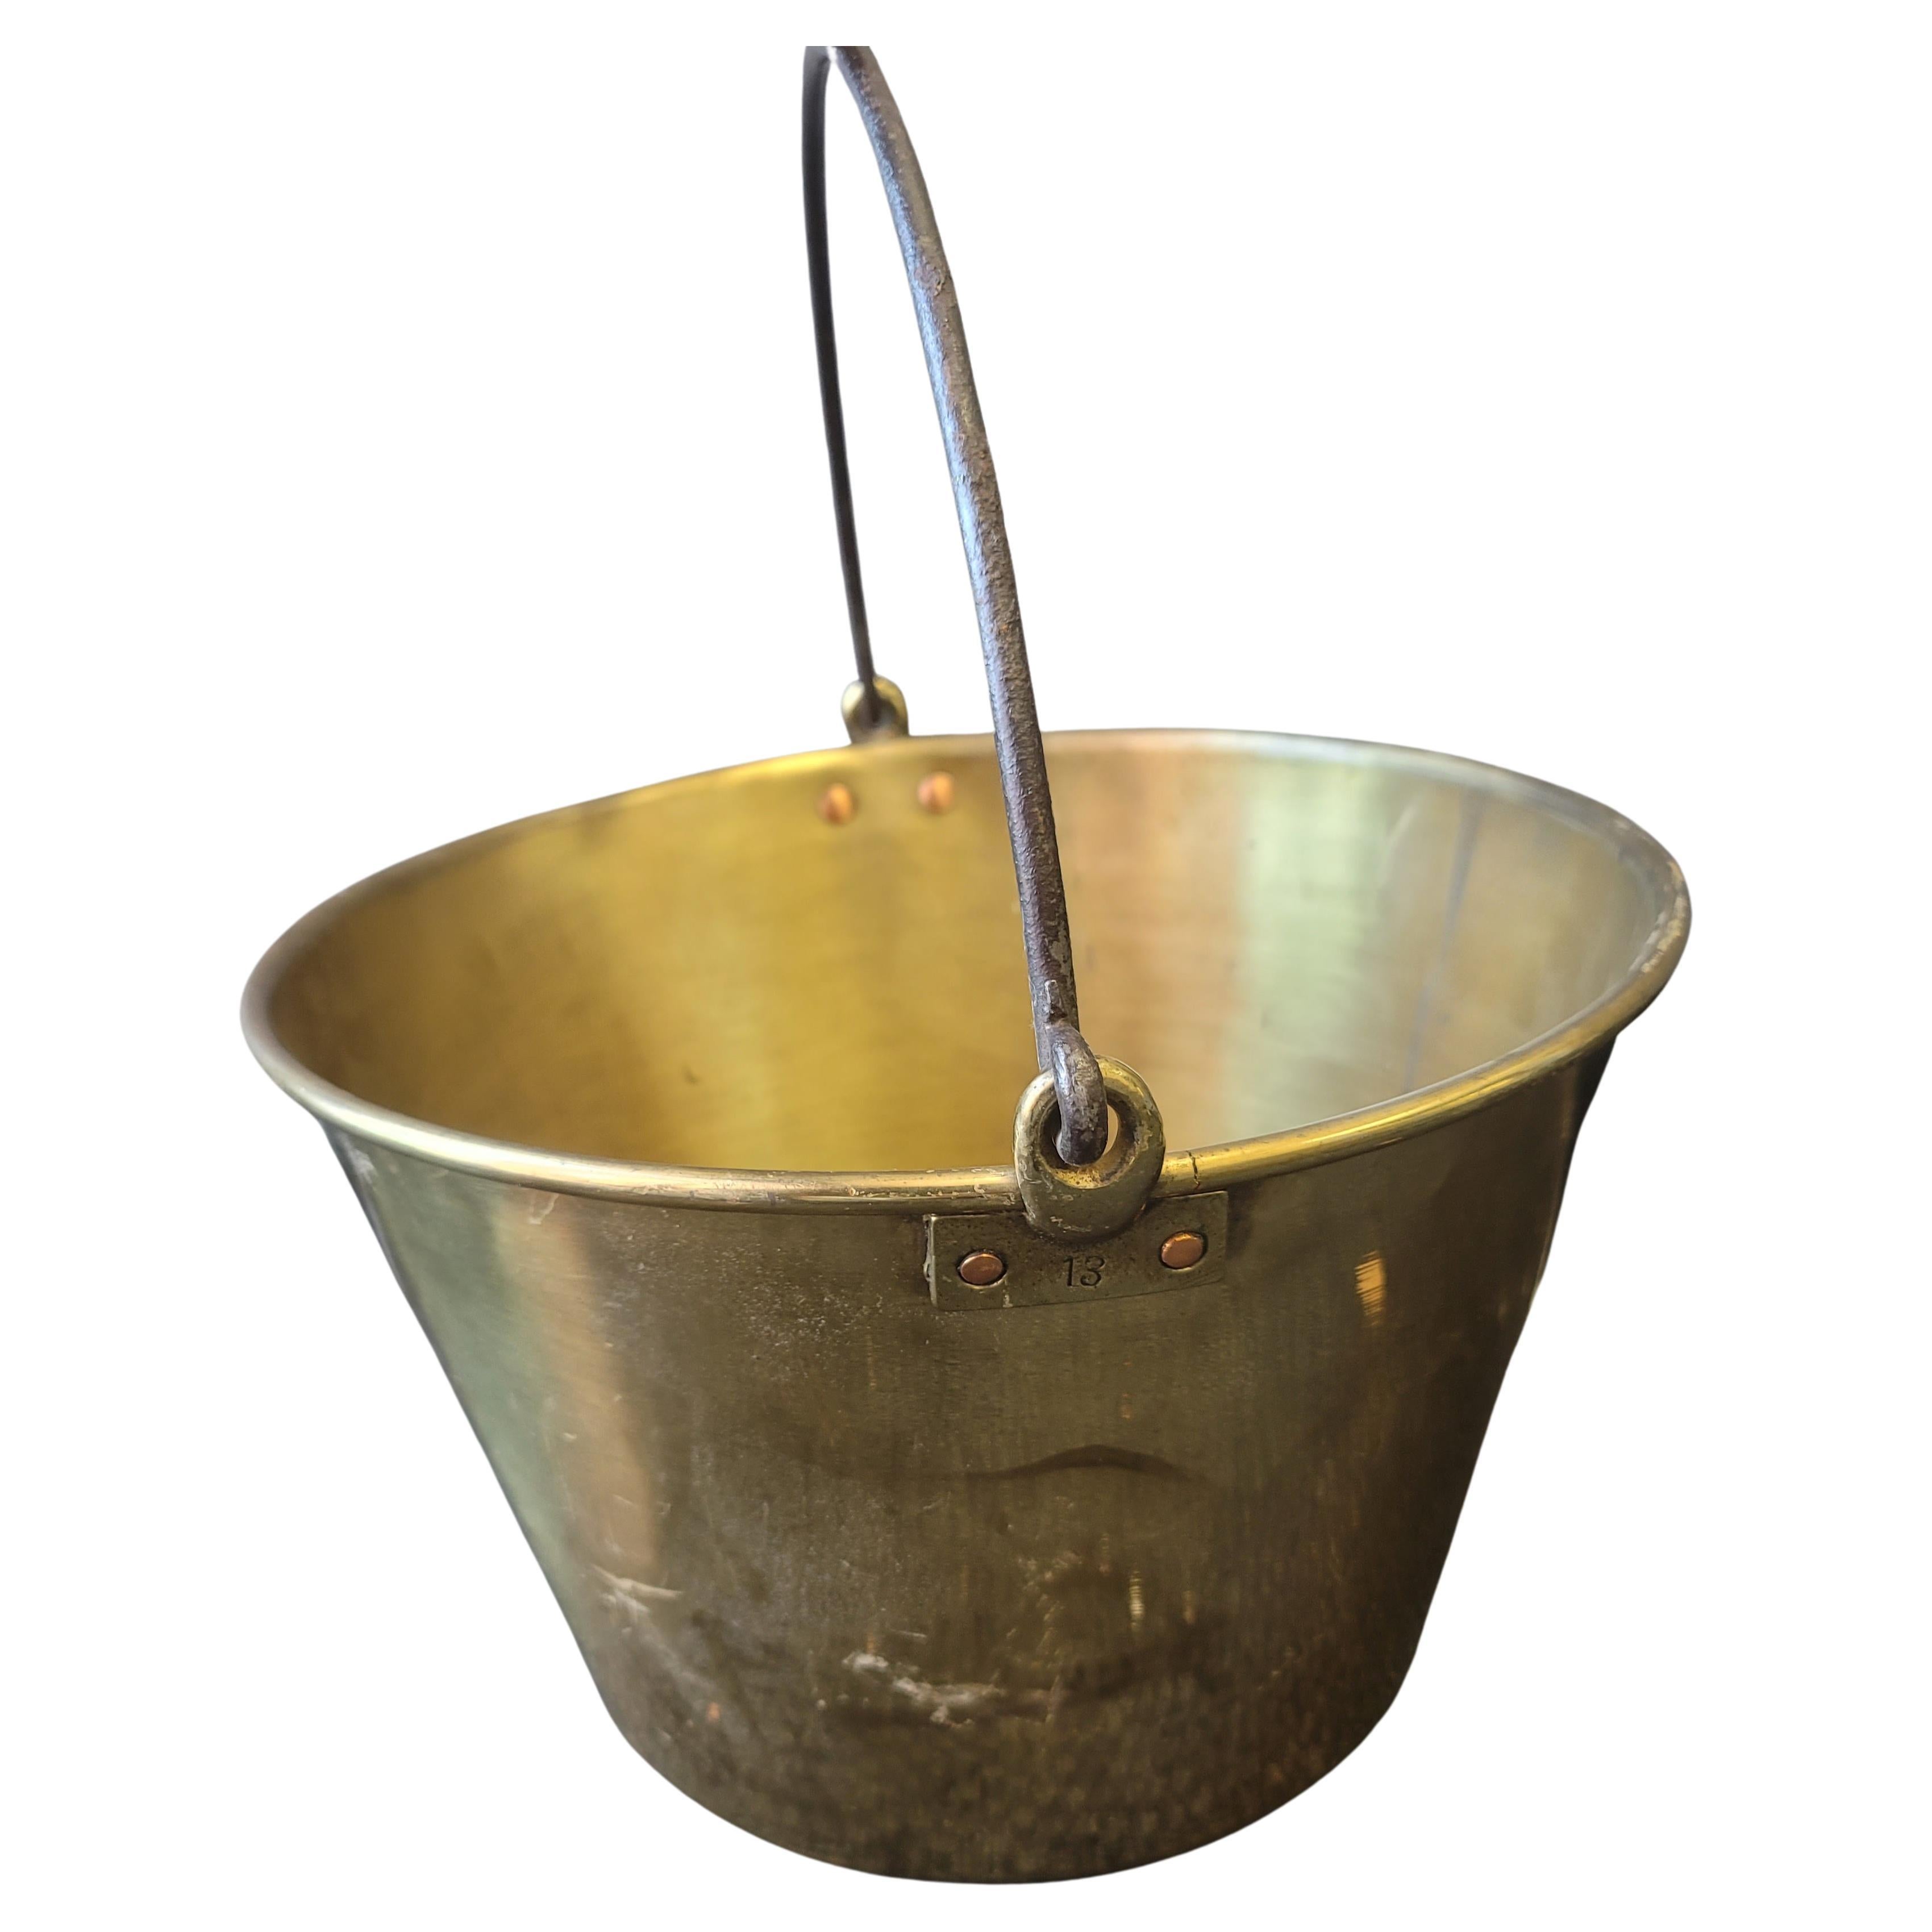 A 1851 Hayden Pat. Ansonia brass Co. Bail brass fireplace bucket or planter in good condition. Polished.
Measures 15